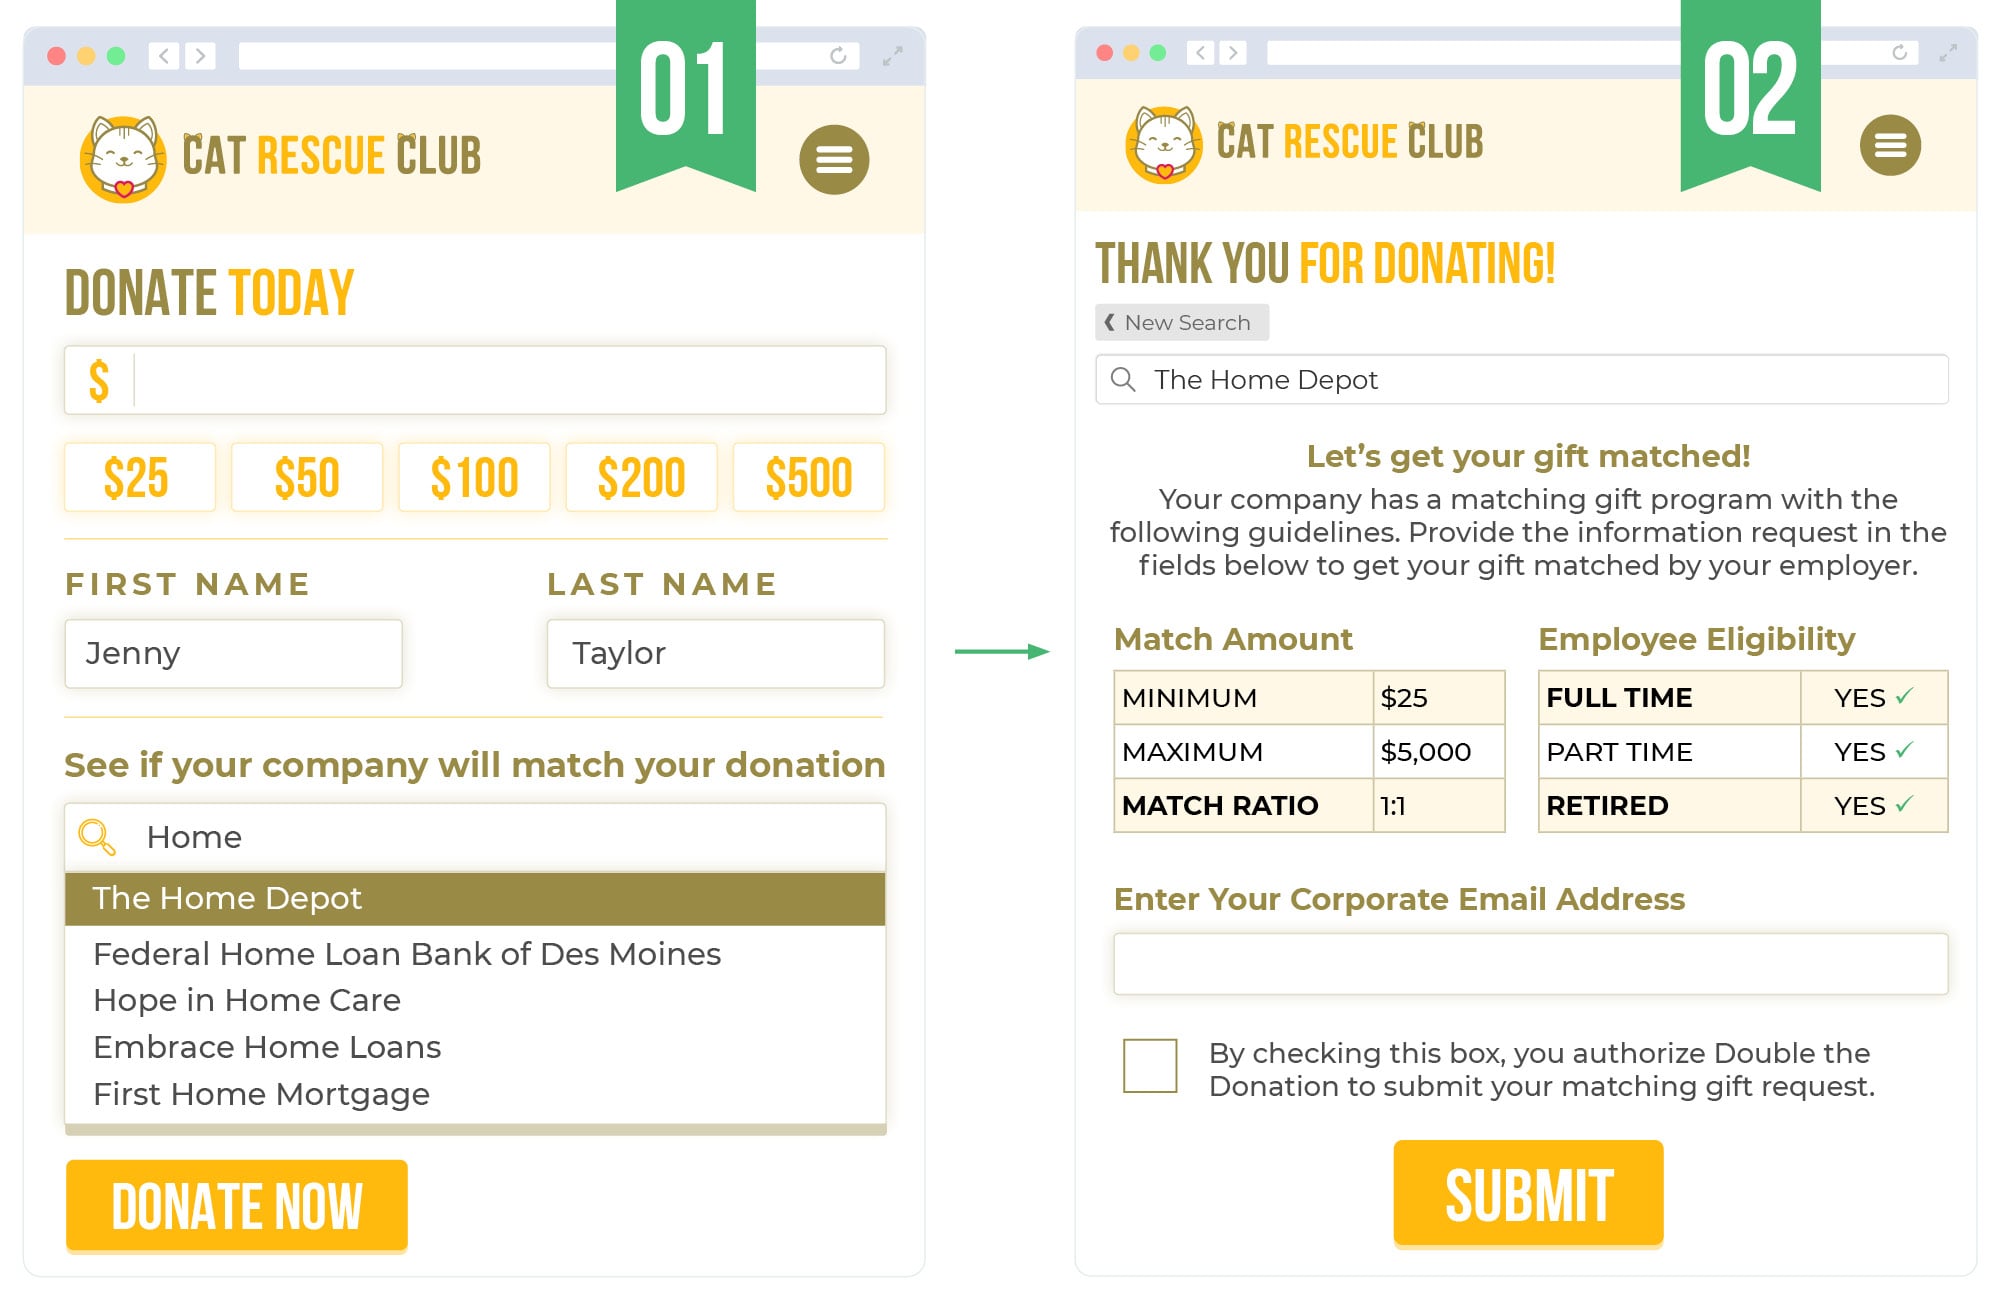 Starting a matching gift program with auto-submission